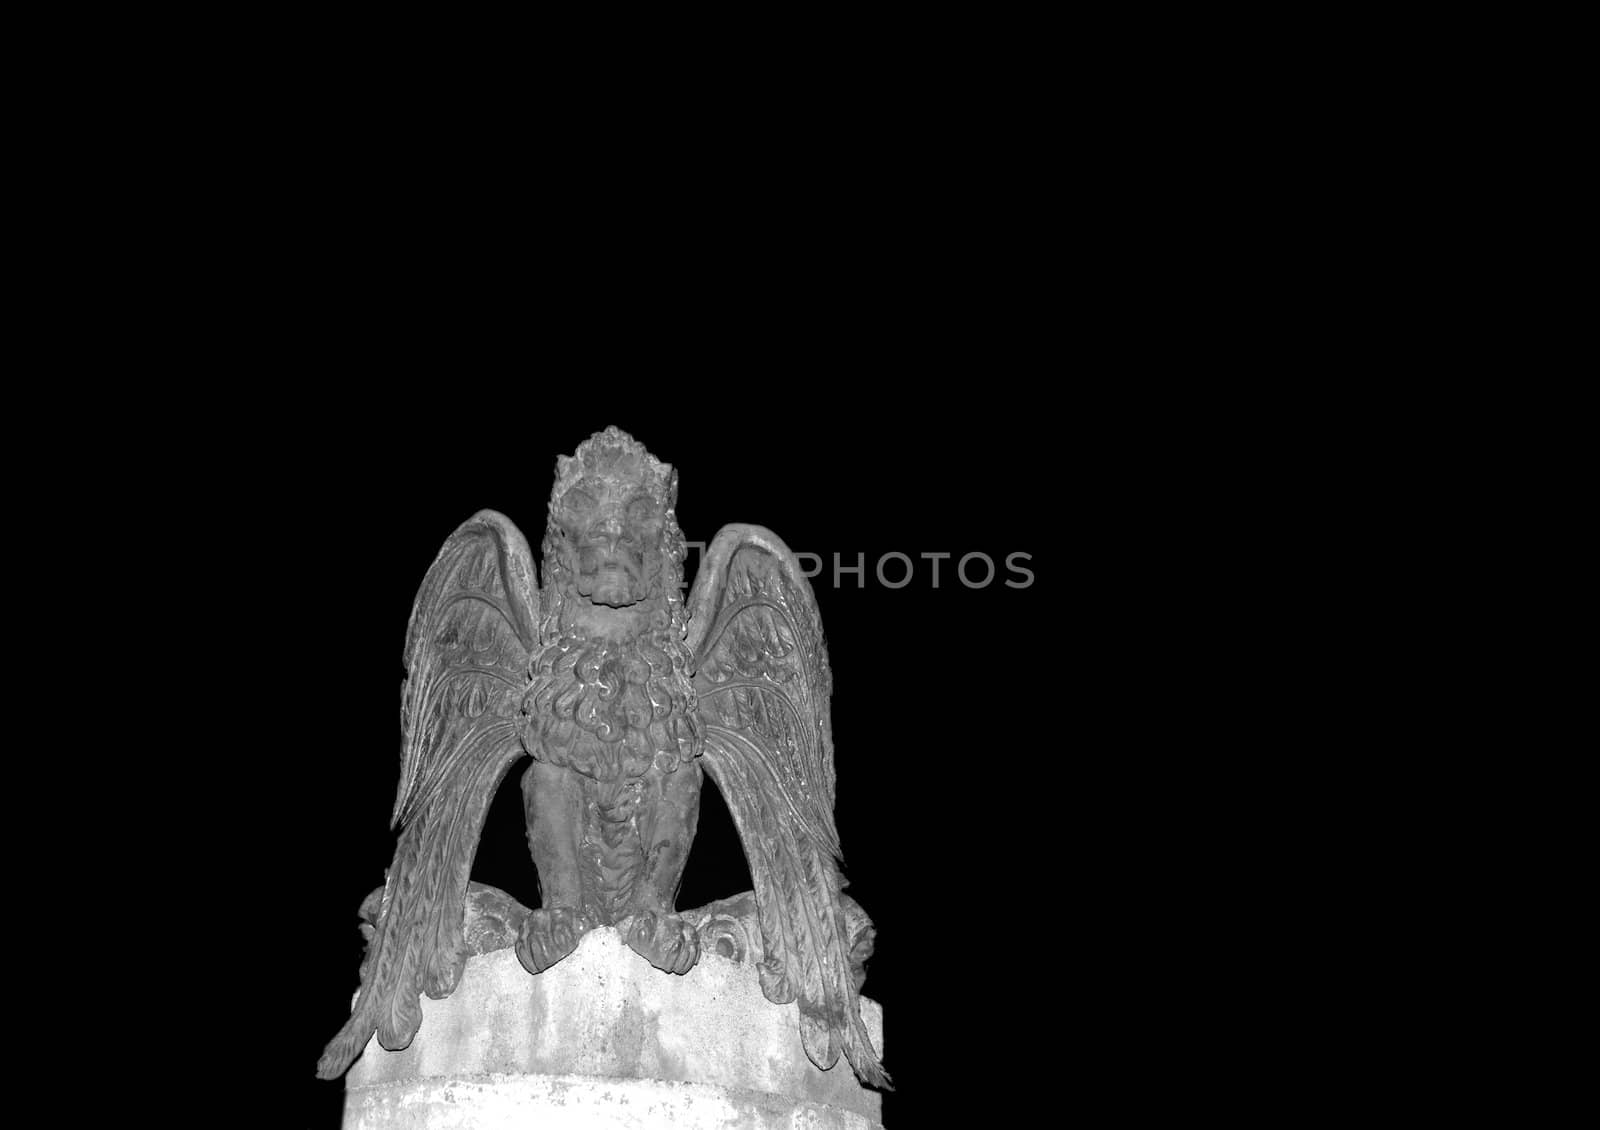 A photograph of a winged lion statue, thought to symbolise strength, swiftness, speed, intelligence, divinity, St Mark, and the city of Venice in Italy. The photograph was taken in Sheffield, England and is isolated on a black background with copy space